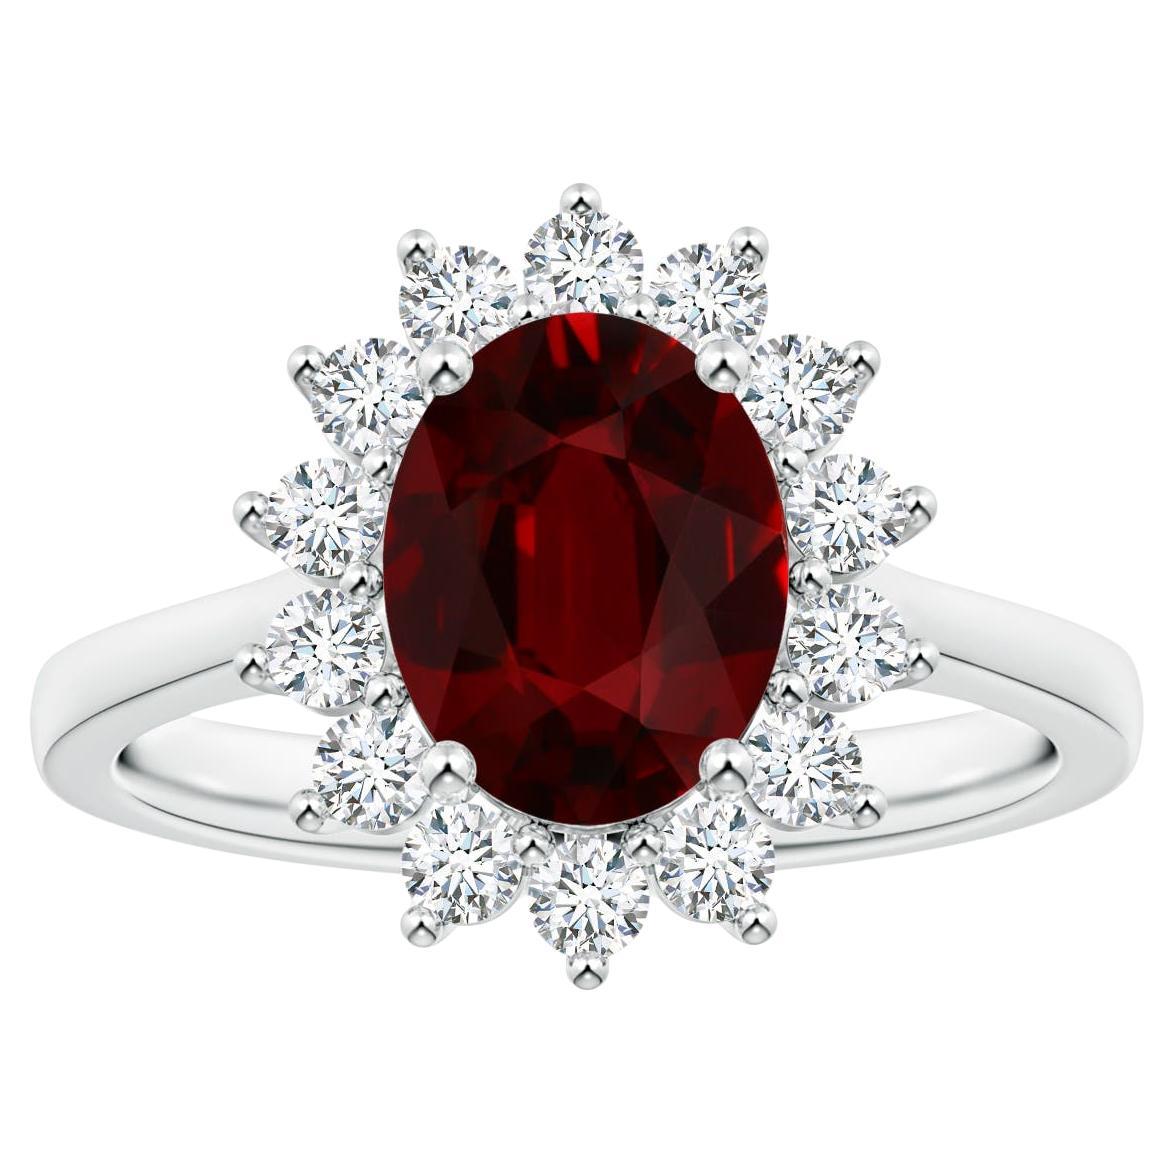 For Sale:  ANGARA Princess Diana Inspired GIA Certified Ruby Halo Ring in White Gold